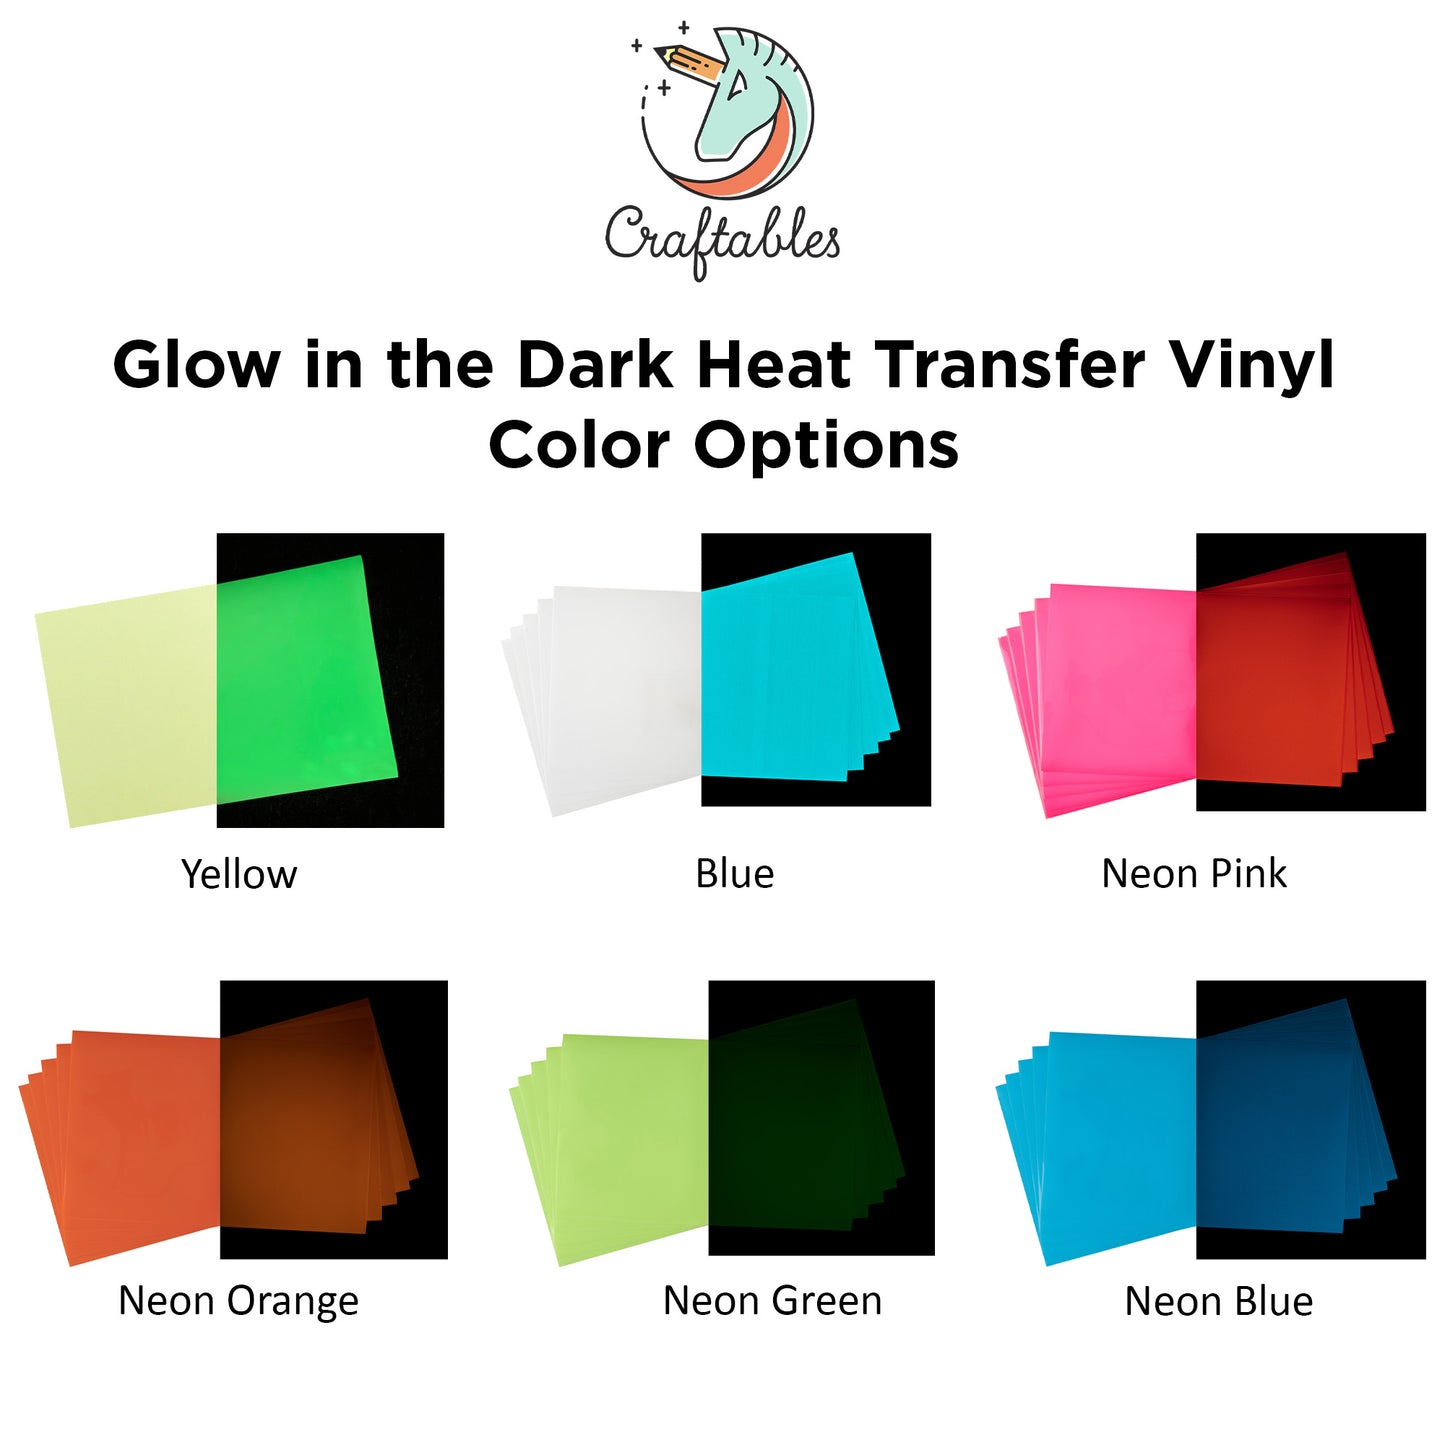 Blue Glow in the Dark Heat Transfer Vinyl Sheets By Craftables